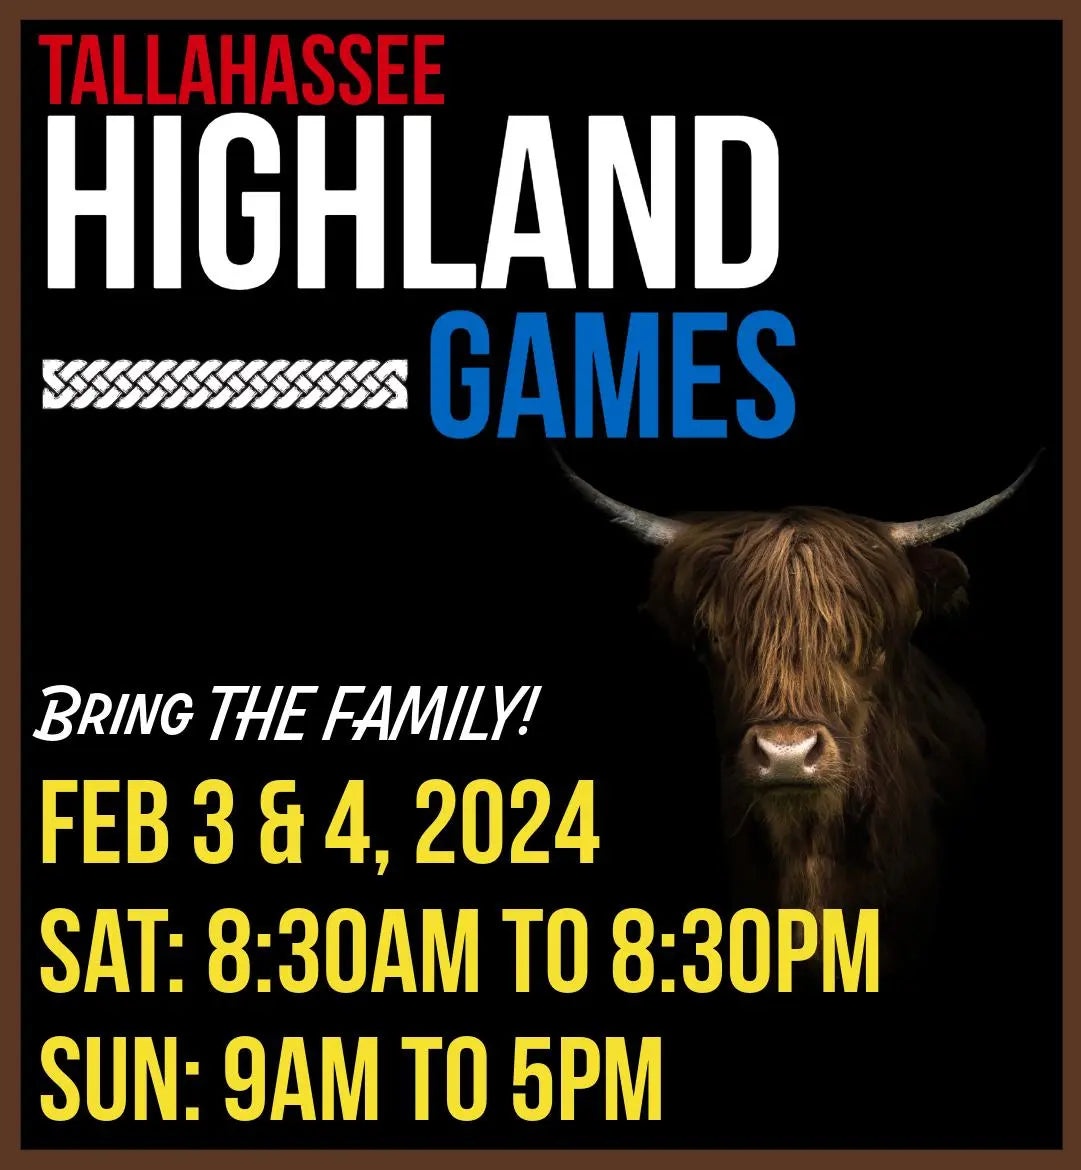 Buy 2024 Tallahassee Highland Games Championship Tickets Today!